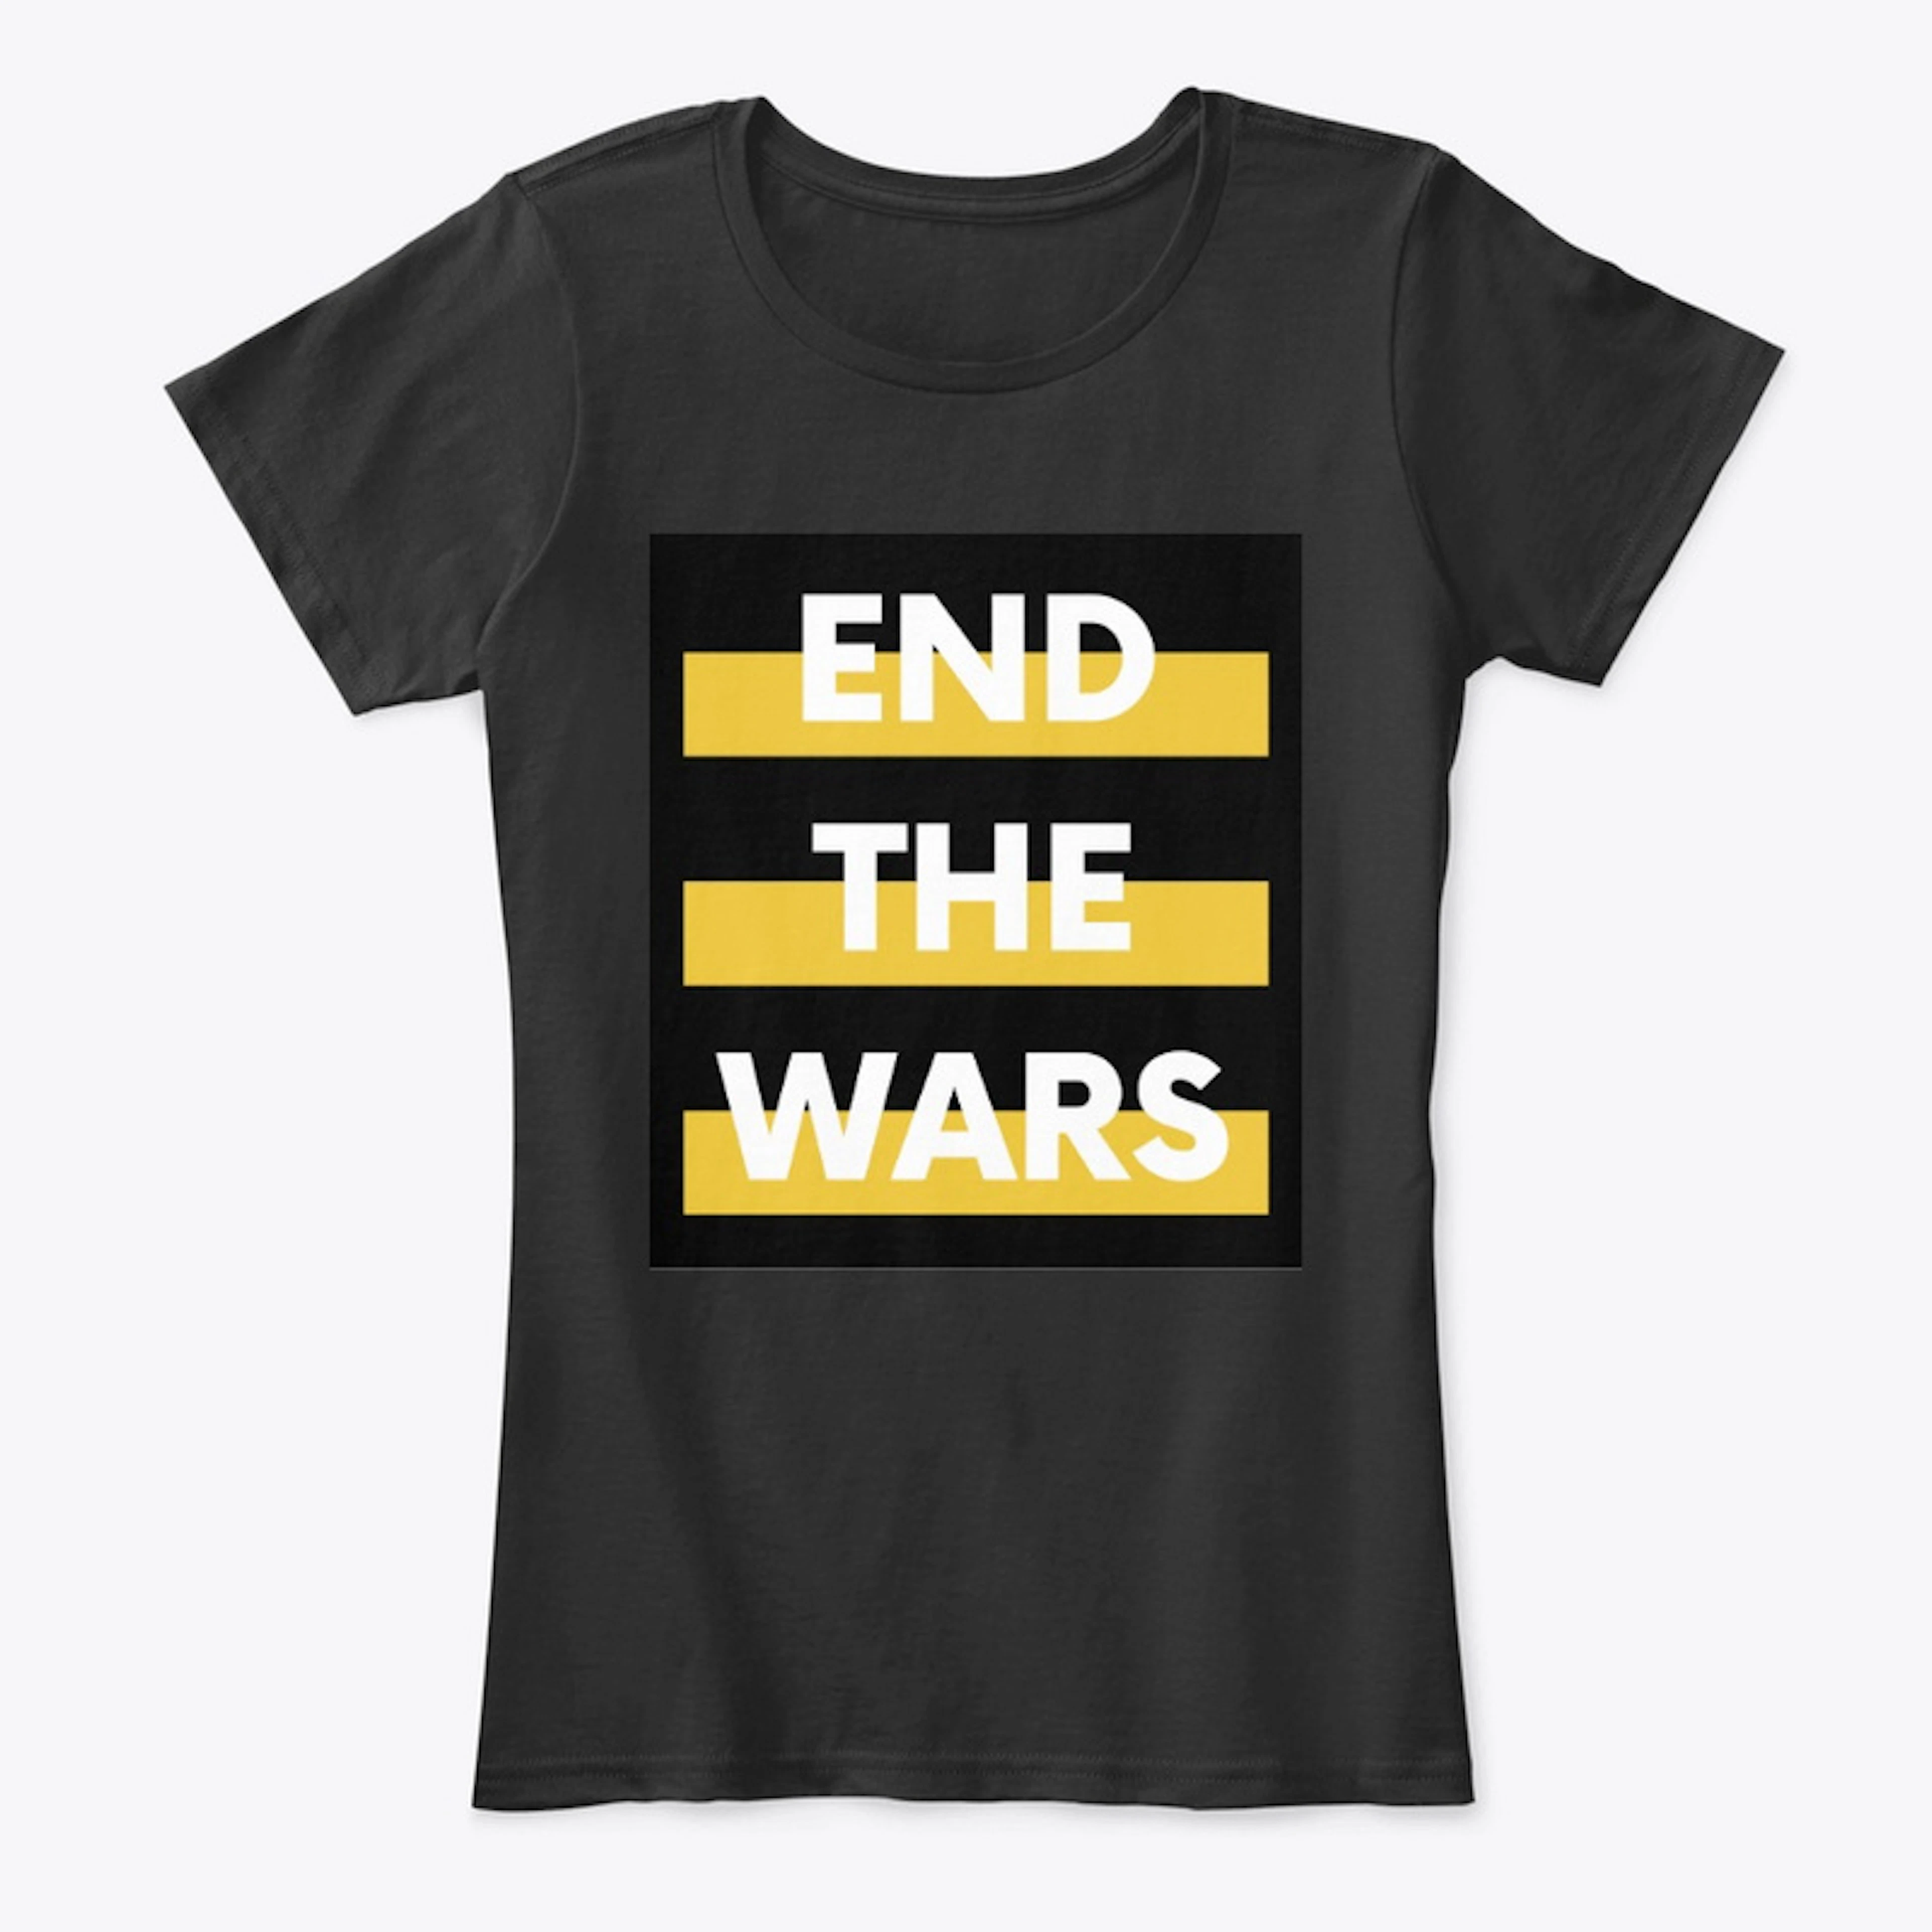 End the Wars